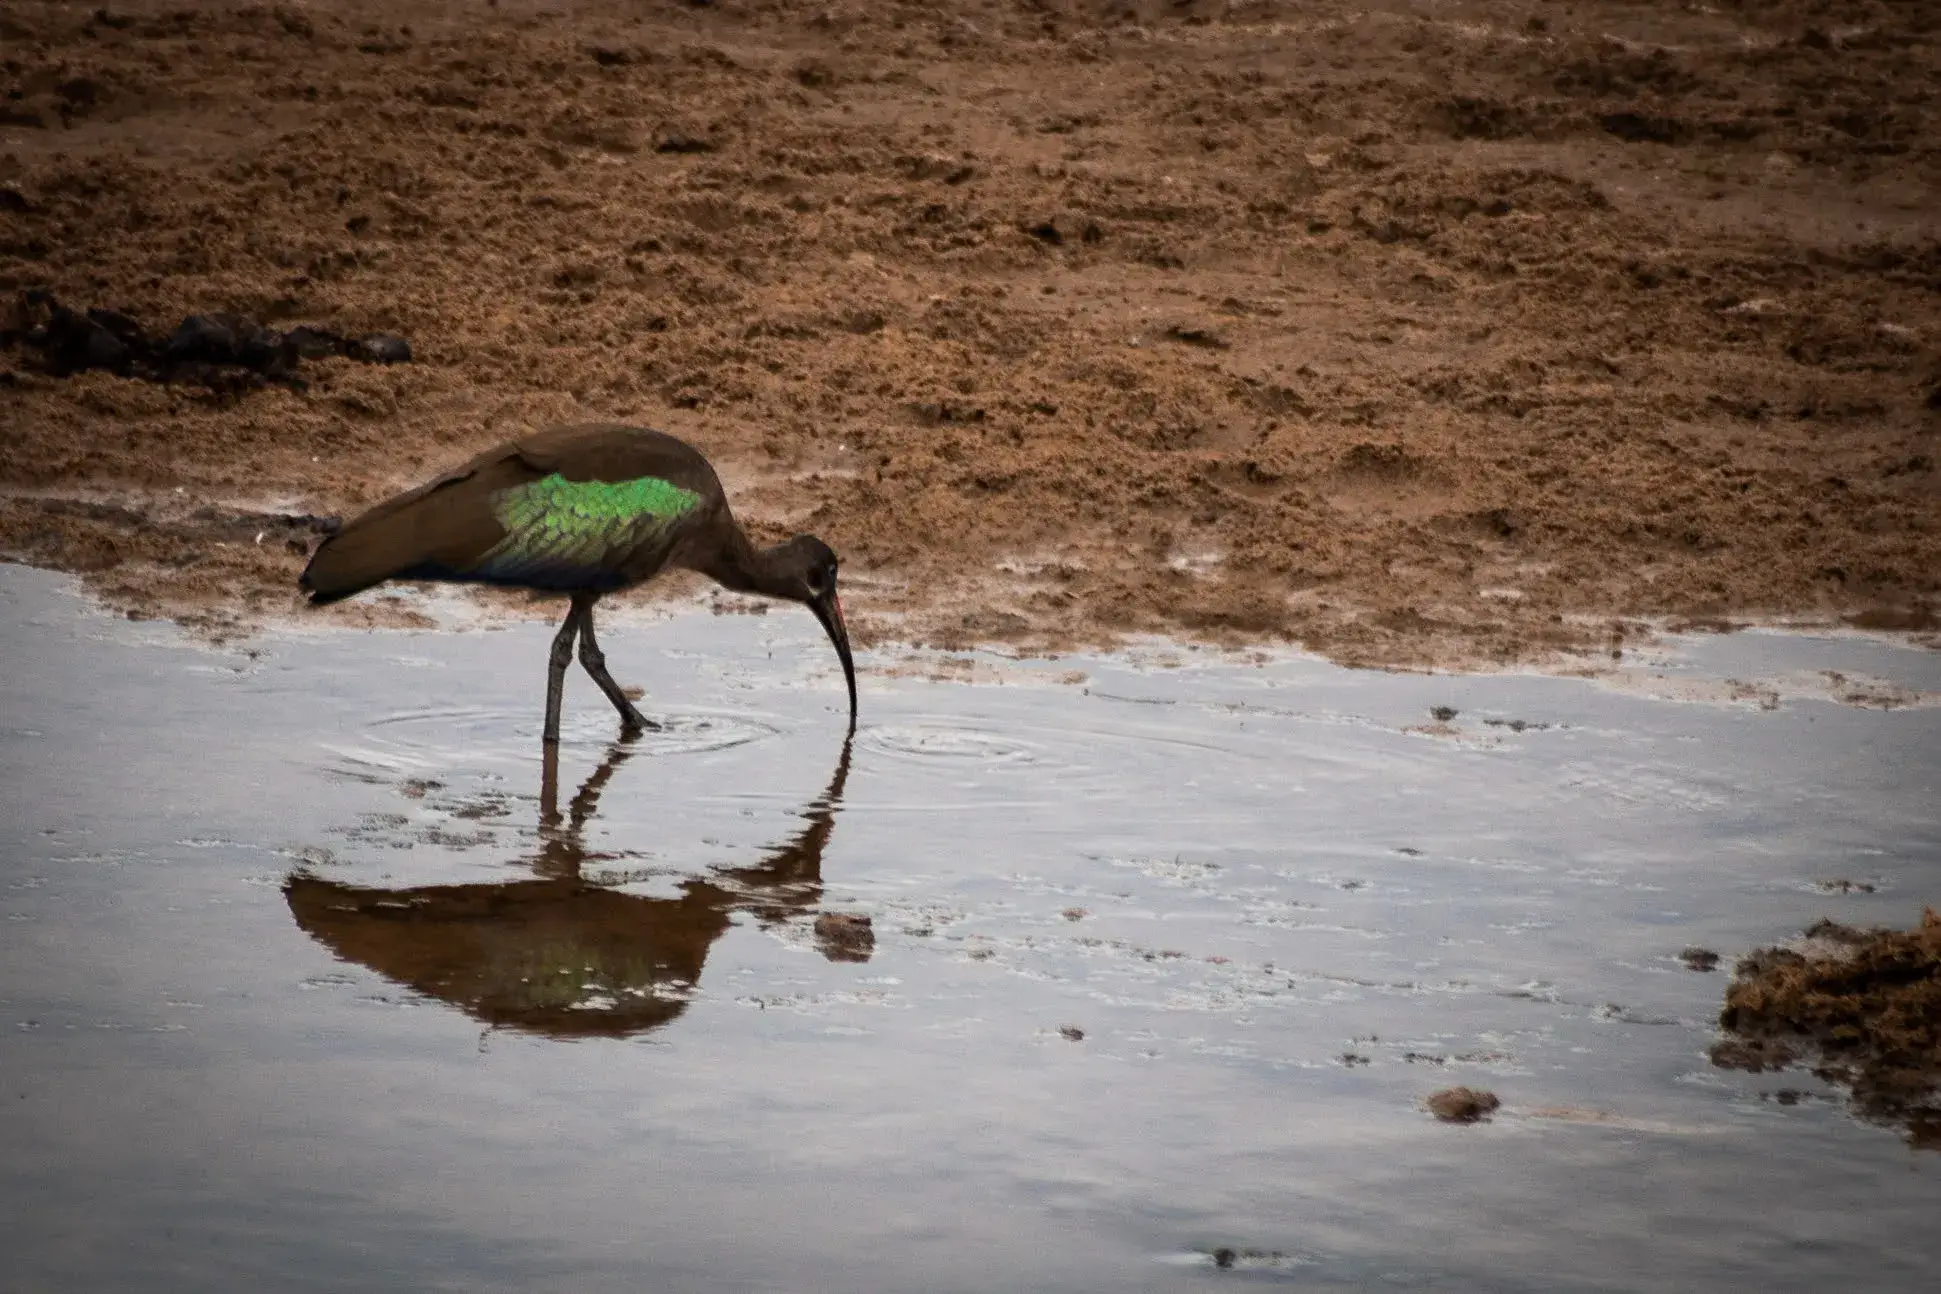 Ibis is a rare bird which is spotted in Tanzanian safari jungles